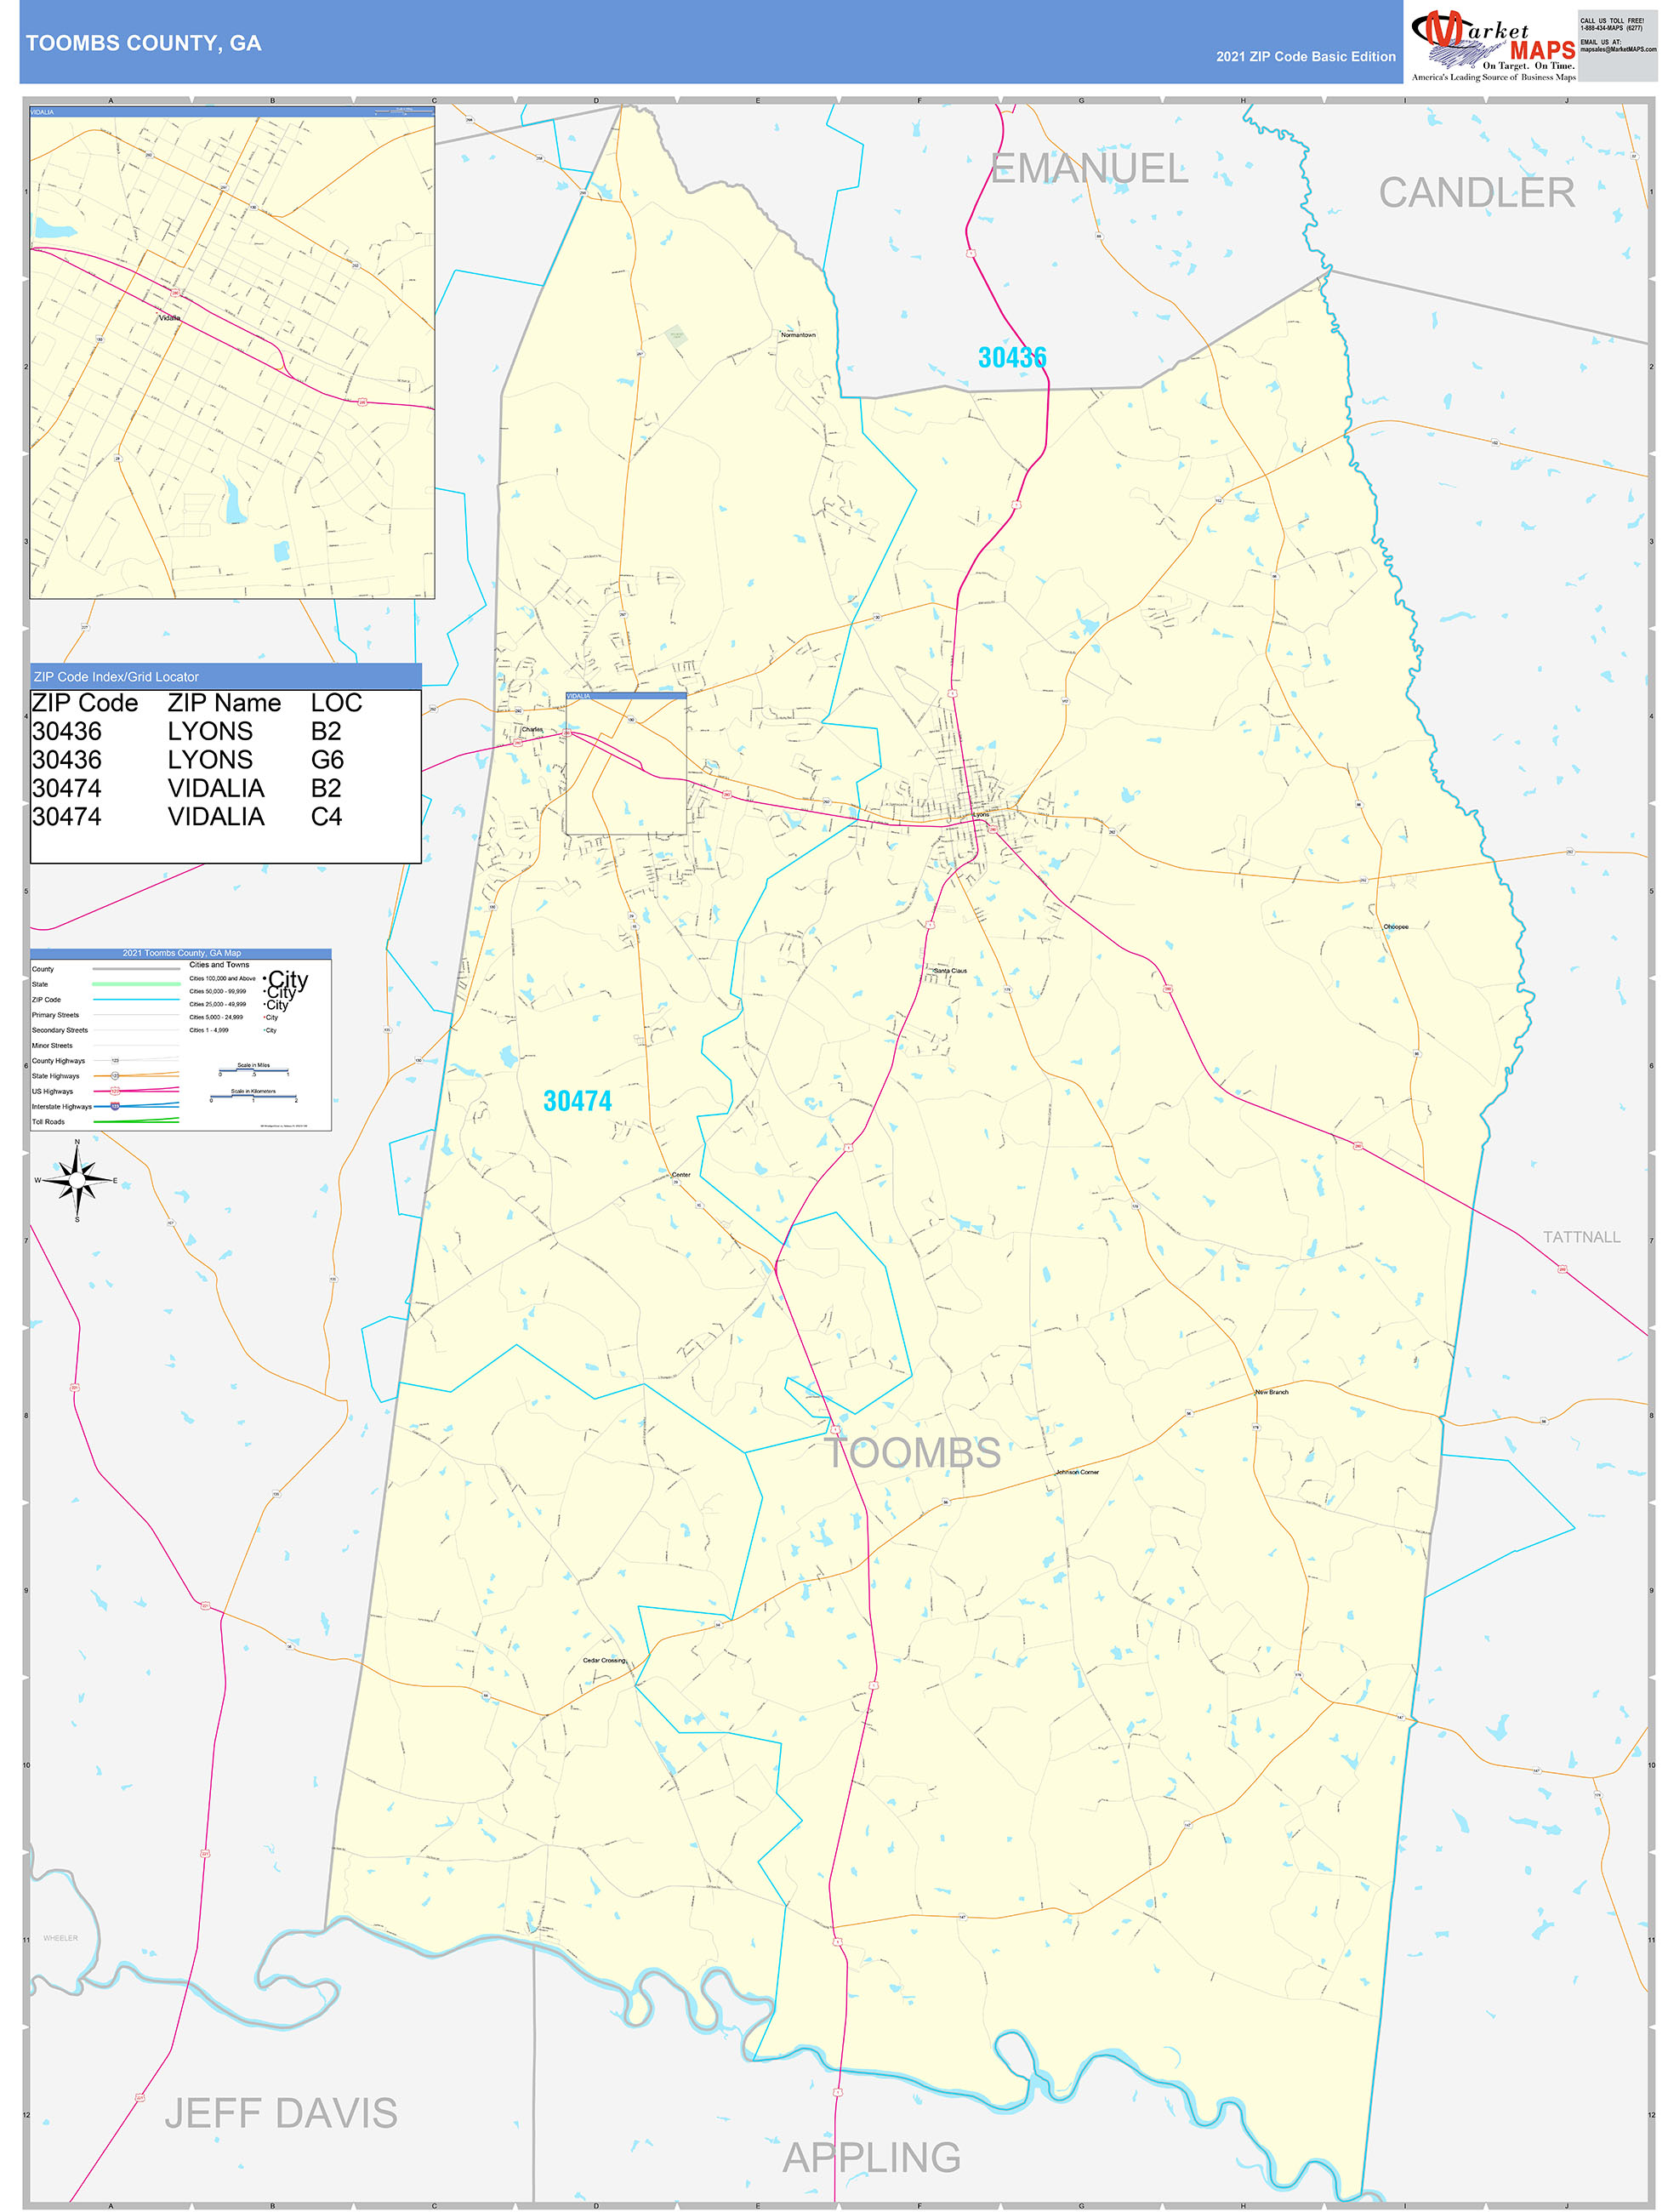 Toombs County GA Zip Code Wall Map Basic Style by MarketMAPS MapSales